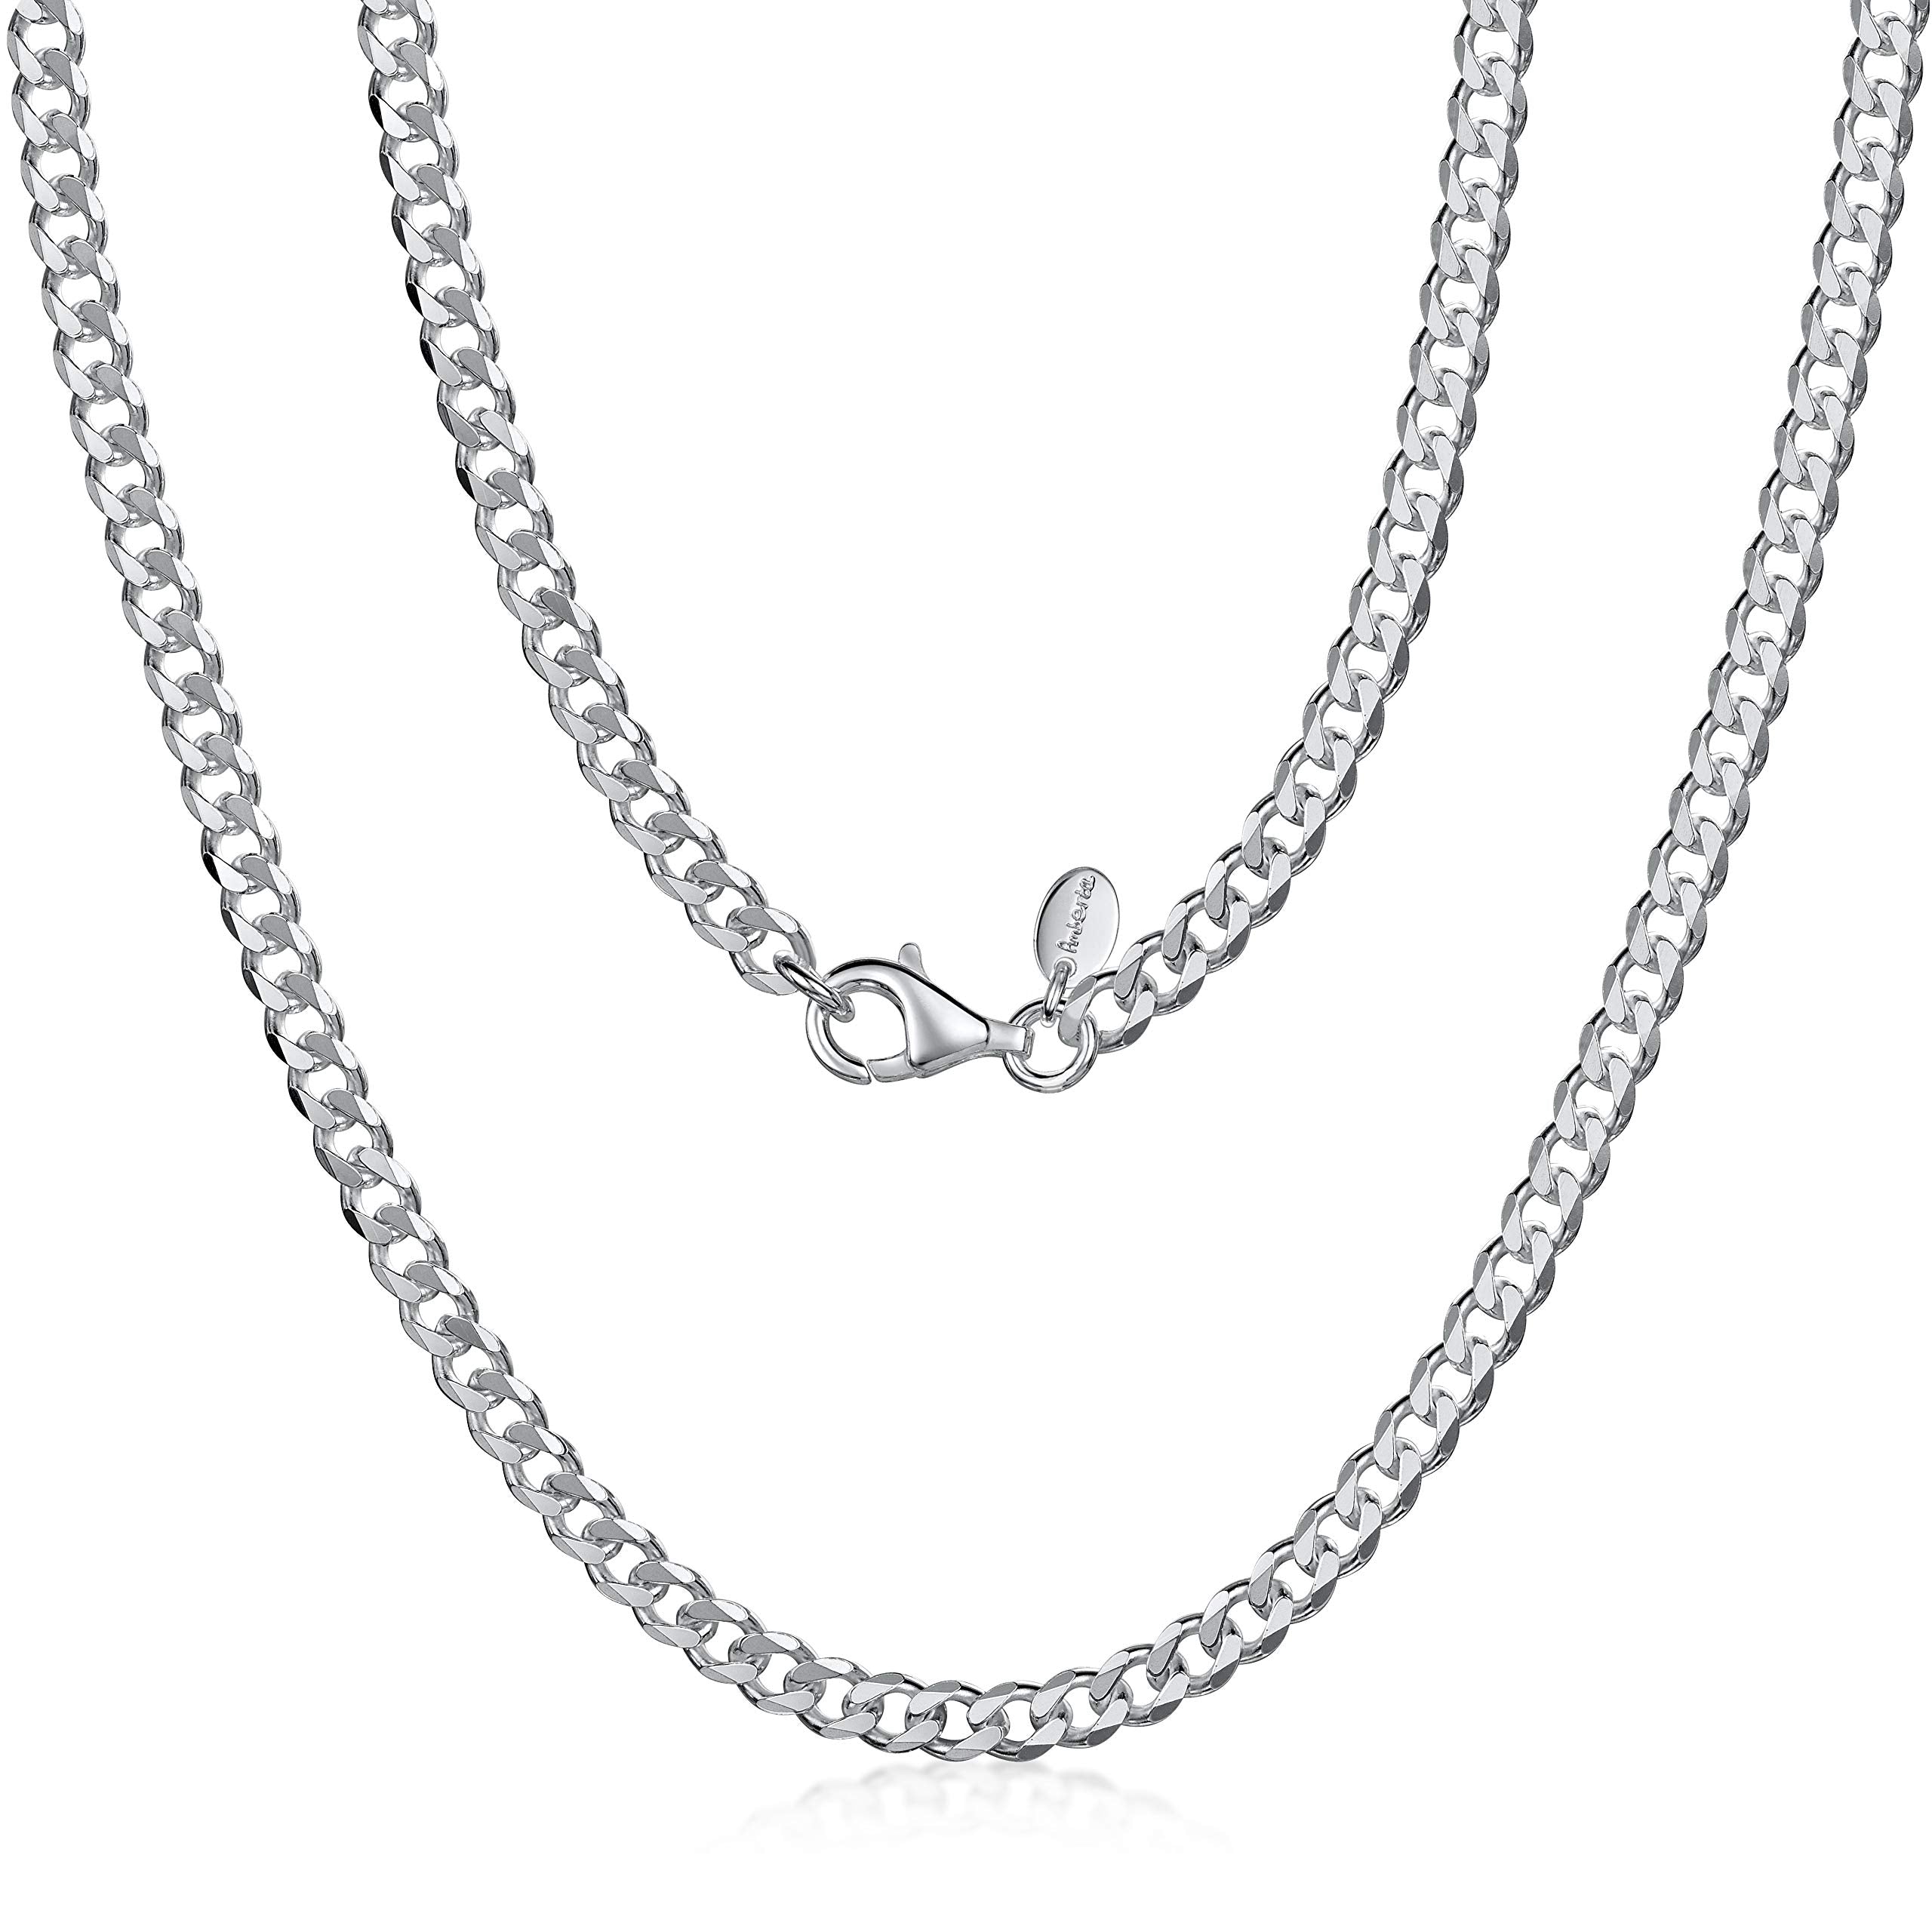 Amberta 925 Sterling Silver Necklace for Men - Flat Cuban Curb Chain 3.7 mm Thick - Sizes: 18" 20" 22" 24" 26" 28" in